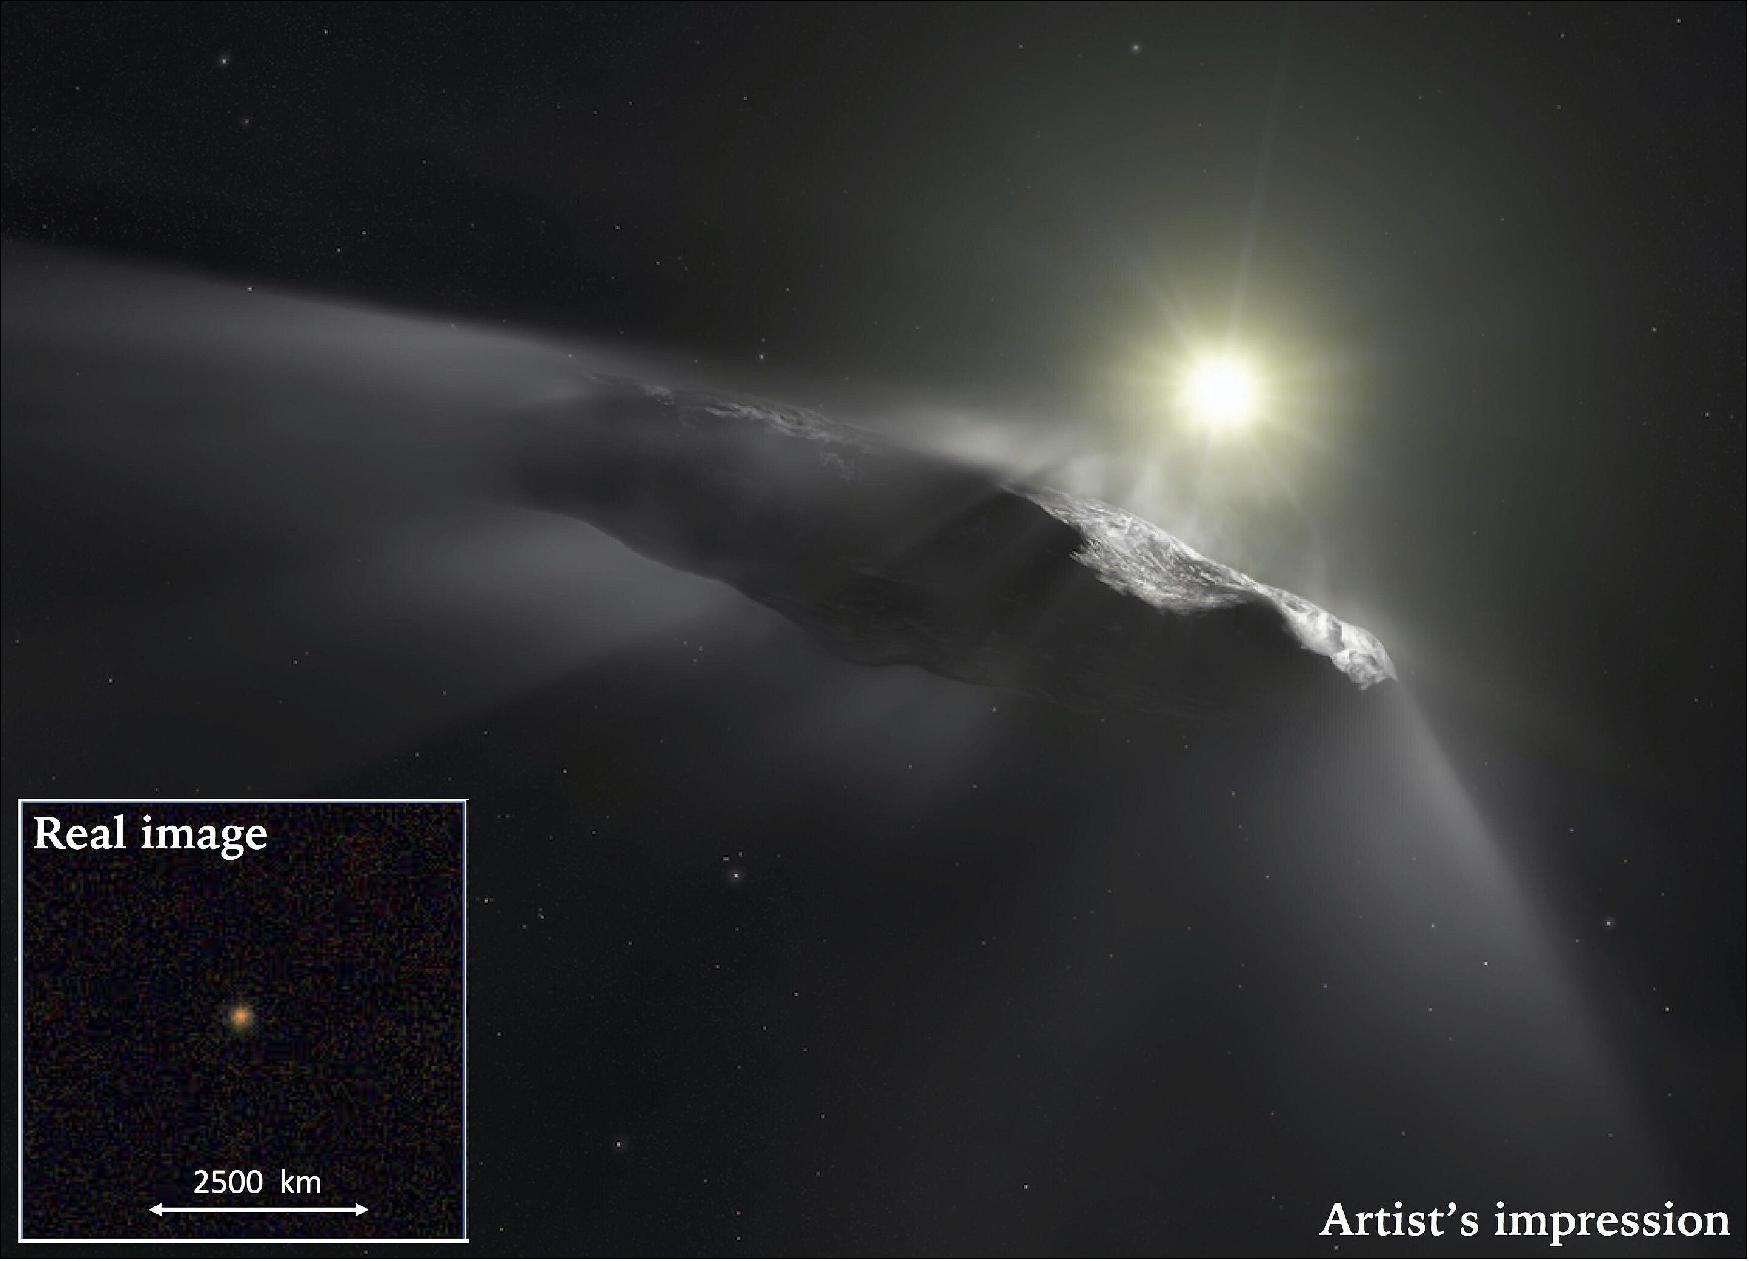 Figure 8: This artist's impression shows the first interstellar object discovered in the Solar System, 'Oumuamua. Observations made with the NASA/ESA Hubble Space Telescope, CFHT, and others, show that the object is moving faster than predicted while leaving the Solar System. The inset shows a color composite produced by combining 192 images obtained through three visible and two near-infrared filters totaling 1.6 hours of integration on October 27, 2017, at the Gemini South telescope (image credit: ESA/Hubble, NASA, ESO/M. Kornmesser, Gemini Observatory/AURA/NSF)